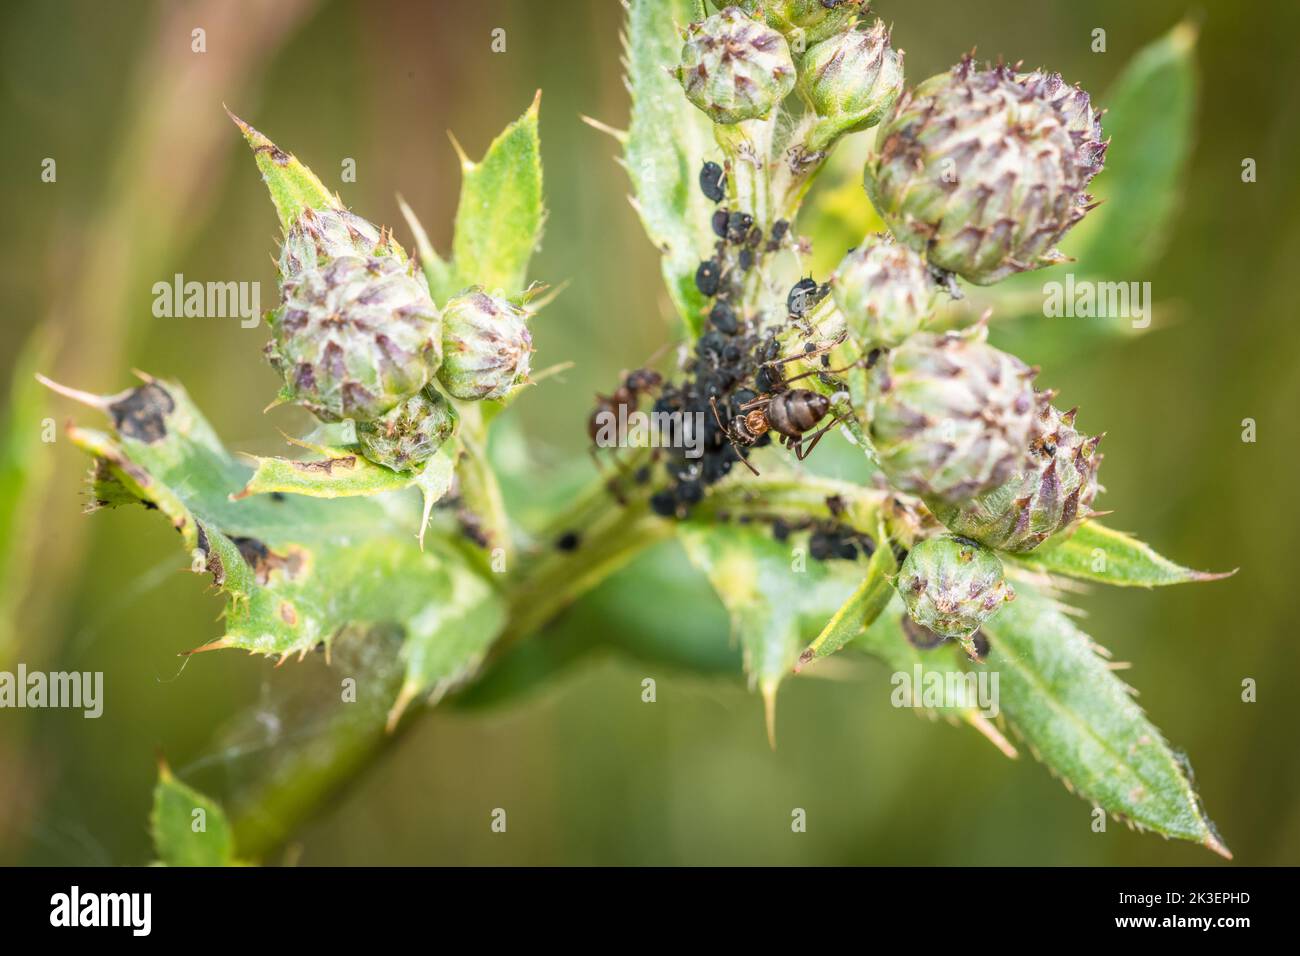 Ants guard herding and milking aphids on a plant in nature, Germany Stock Photo